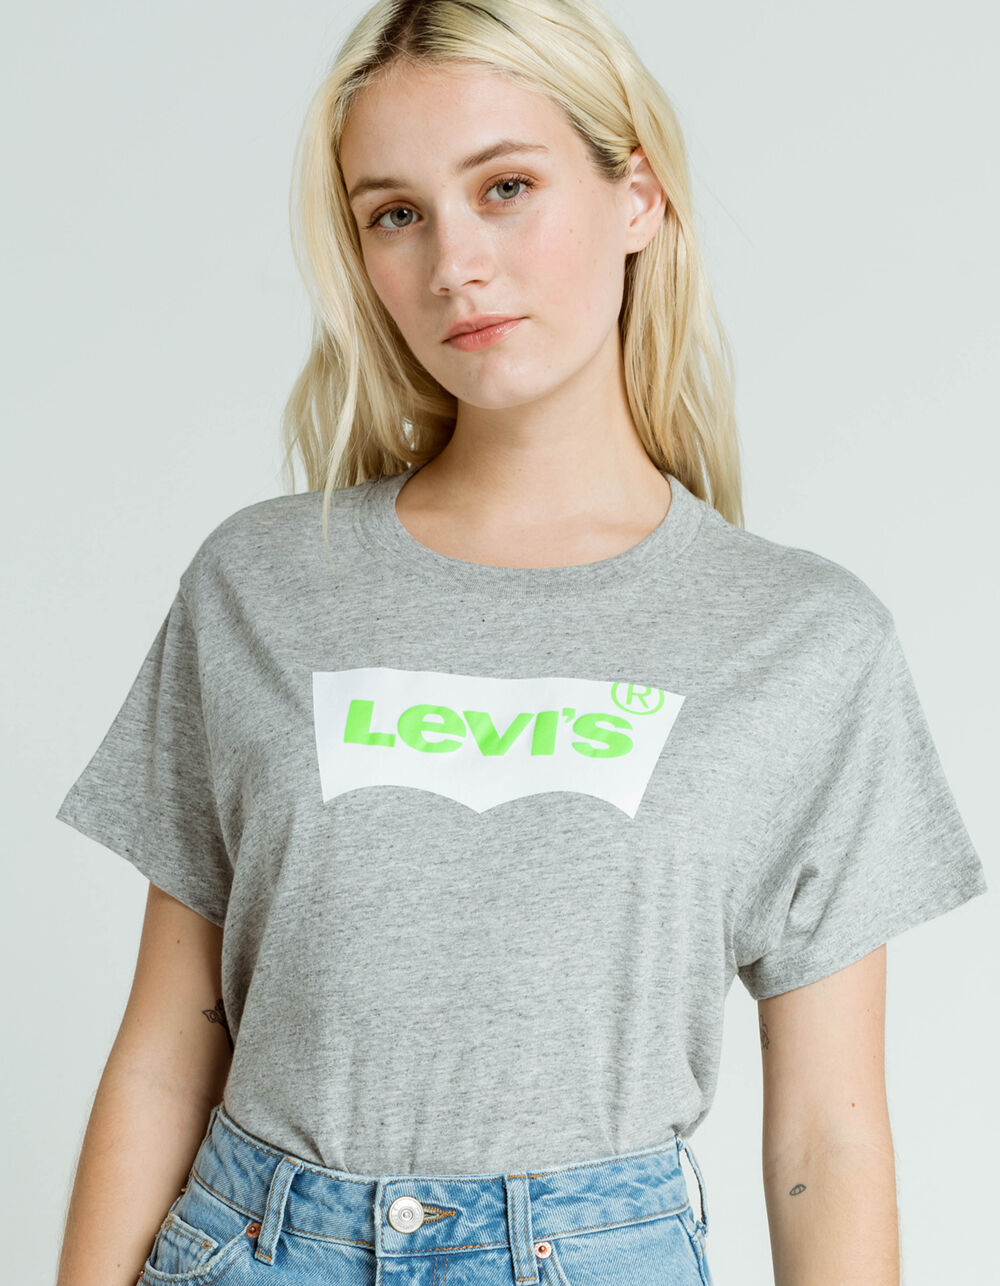 LEVI'S Vintage Logo Womens Cropped Tee - HEATHER GRAY | Tillys